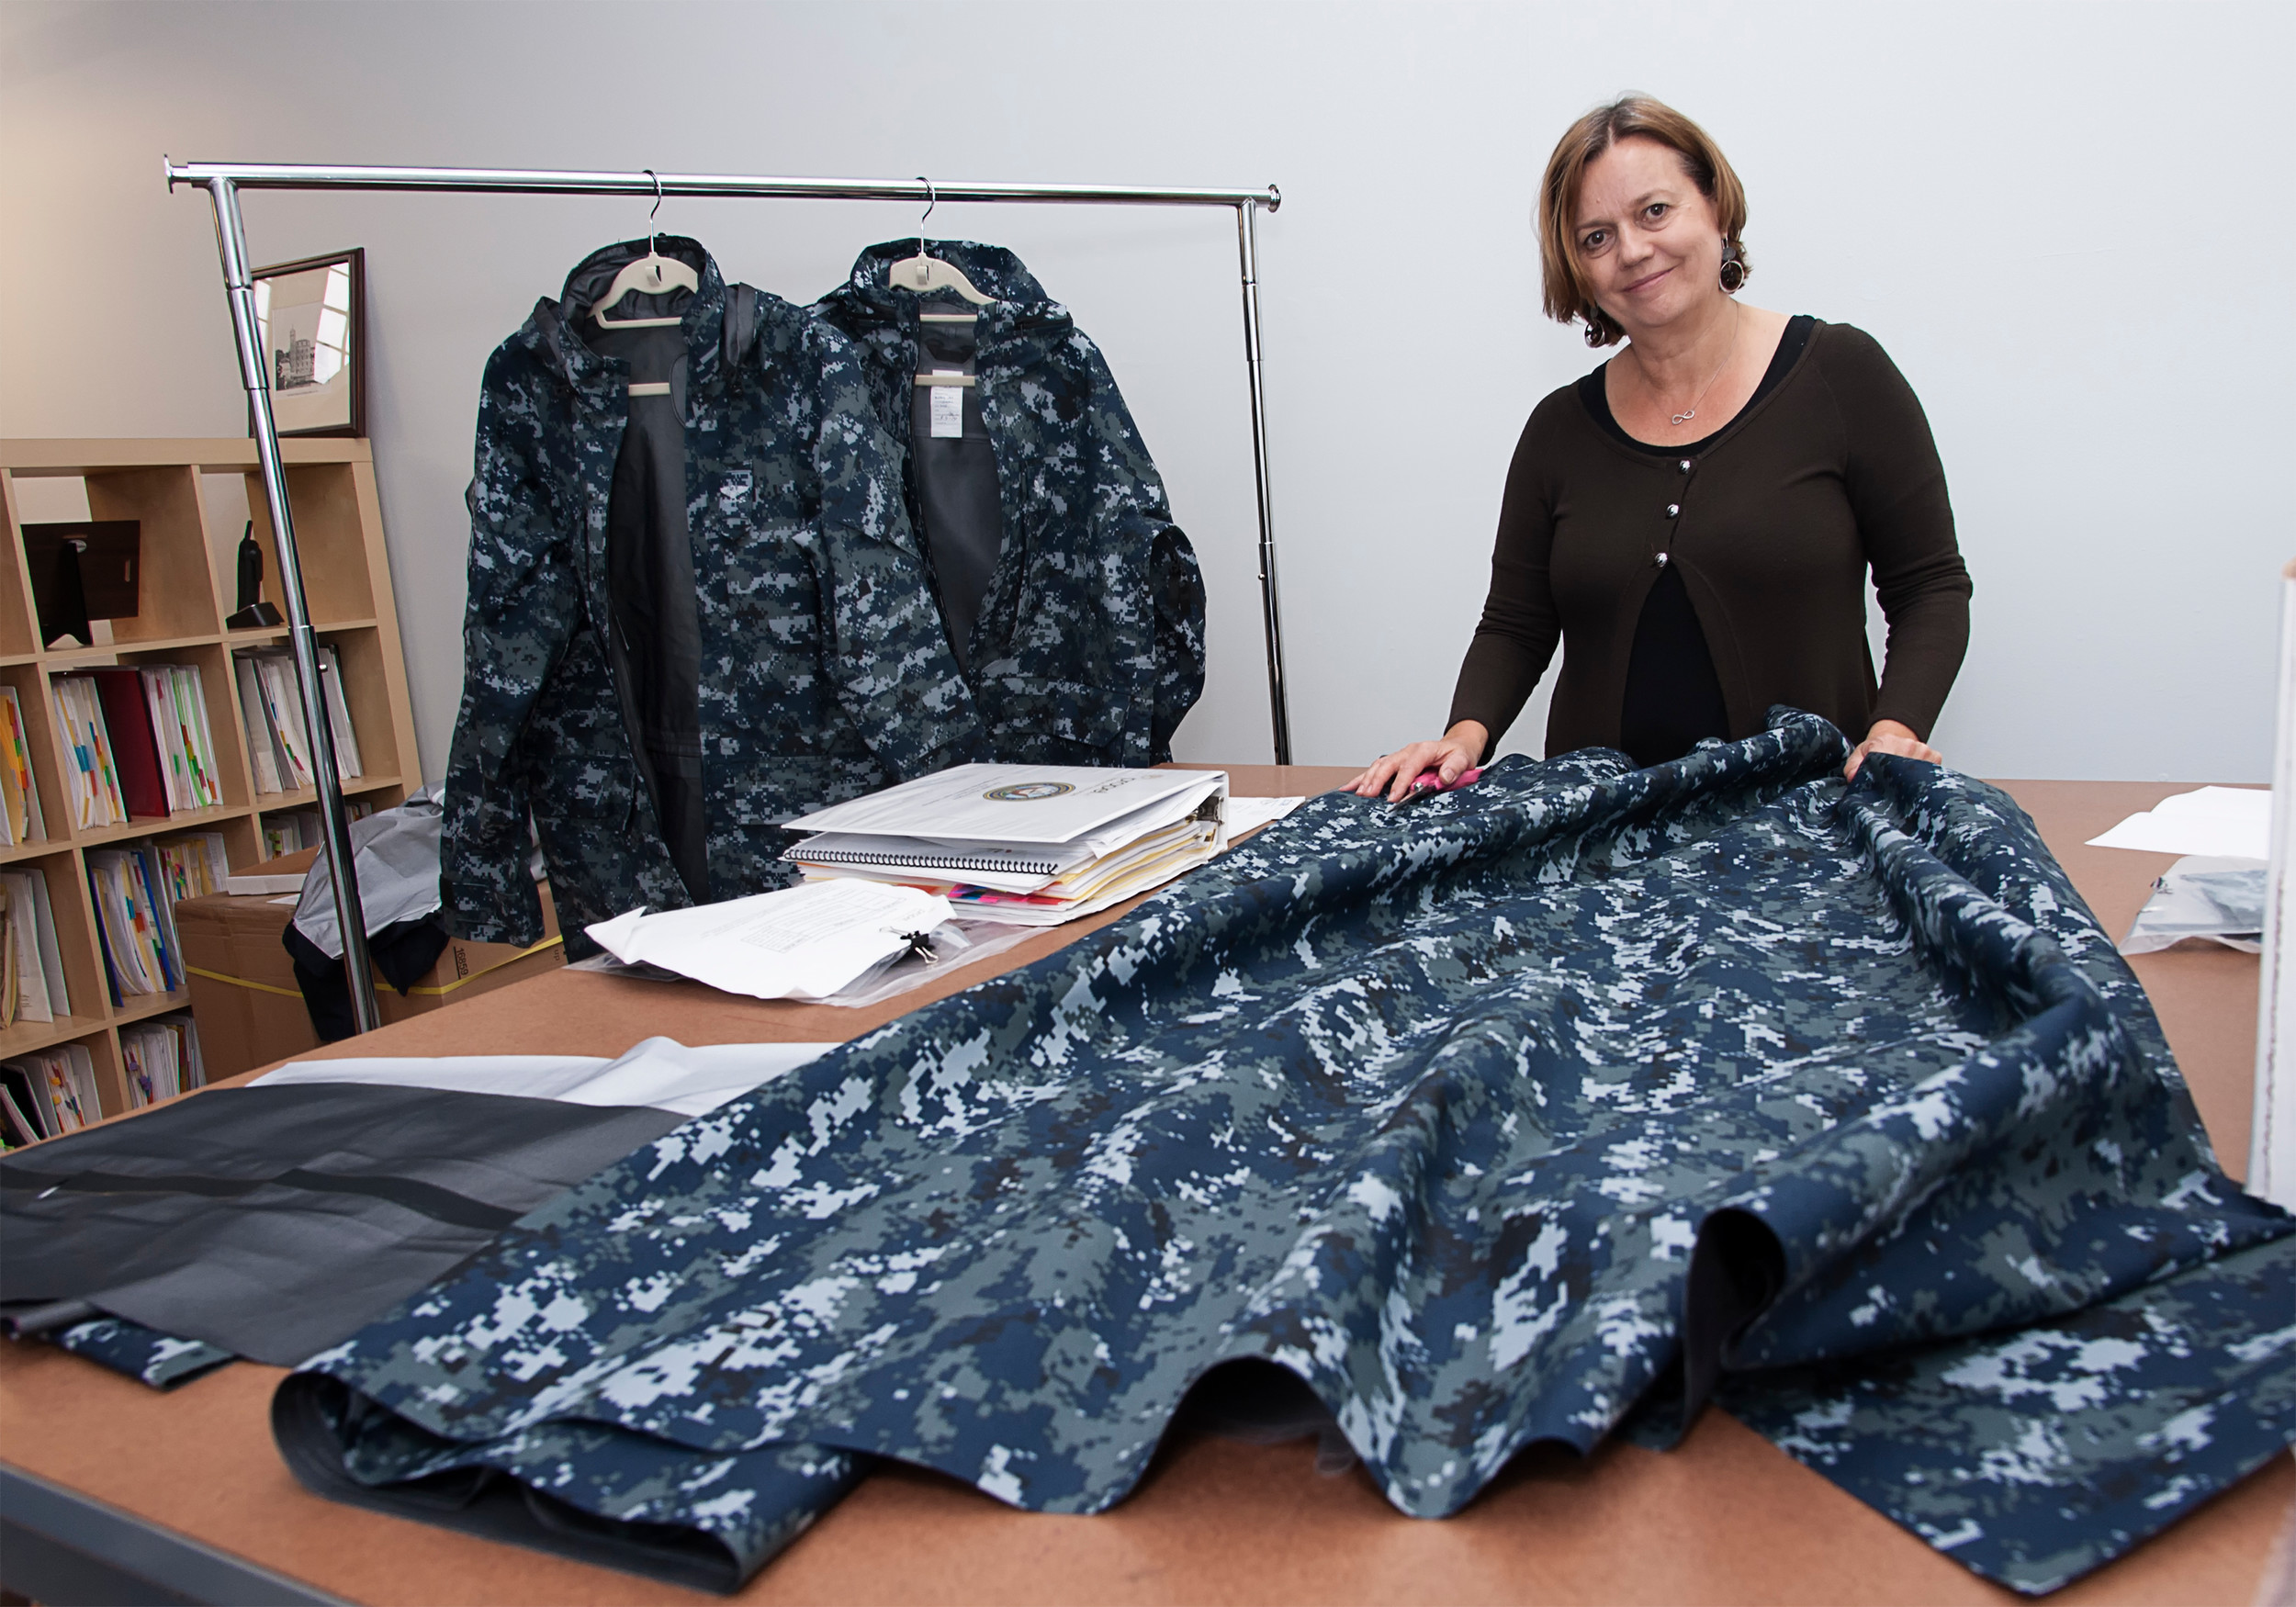 READY FOR BATTLE: Clare King, president of Propel LLC, handling the material used to make one of the coats they are producing for the US Navy. The coats are produced with limited thread and needle, instead using bonding and welding techniques. / PBN PHOTO/ MICHAEL SALERNO